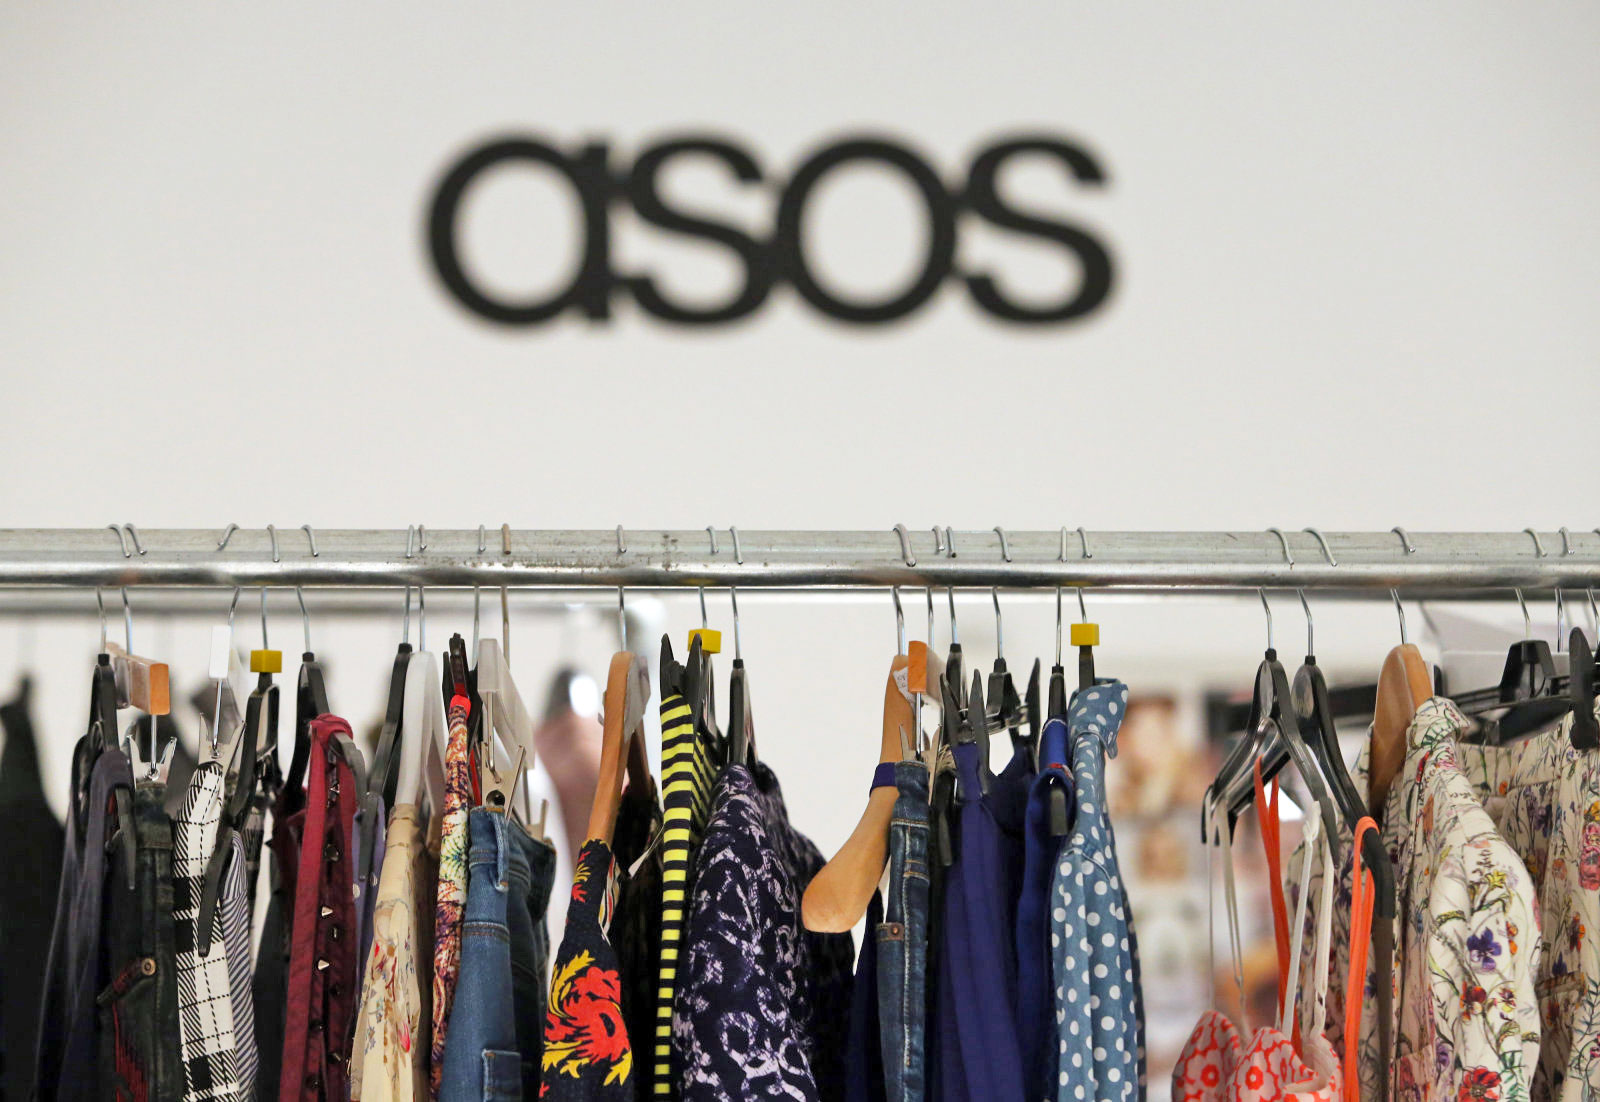 Asos Profits Plunge in 'Disappointing' Year